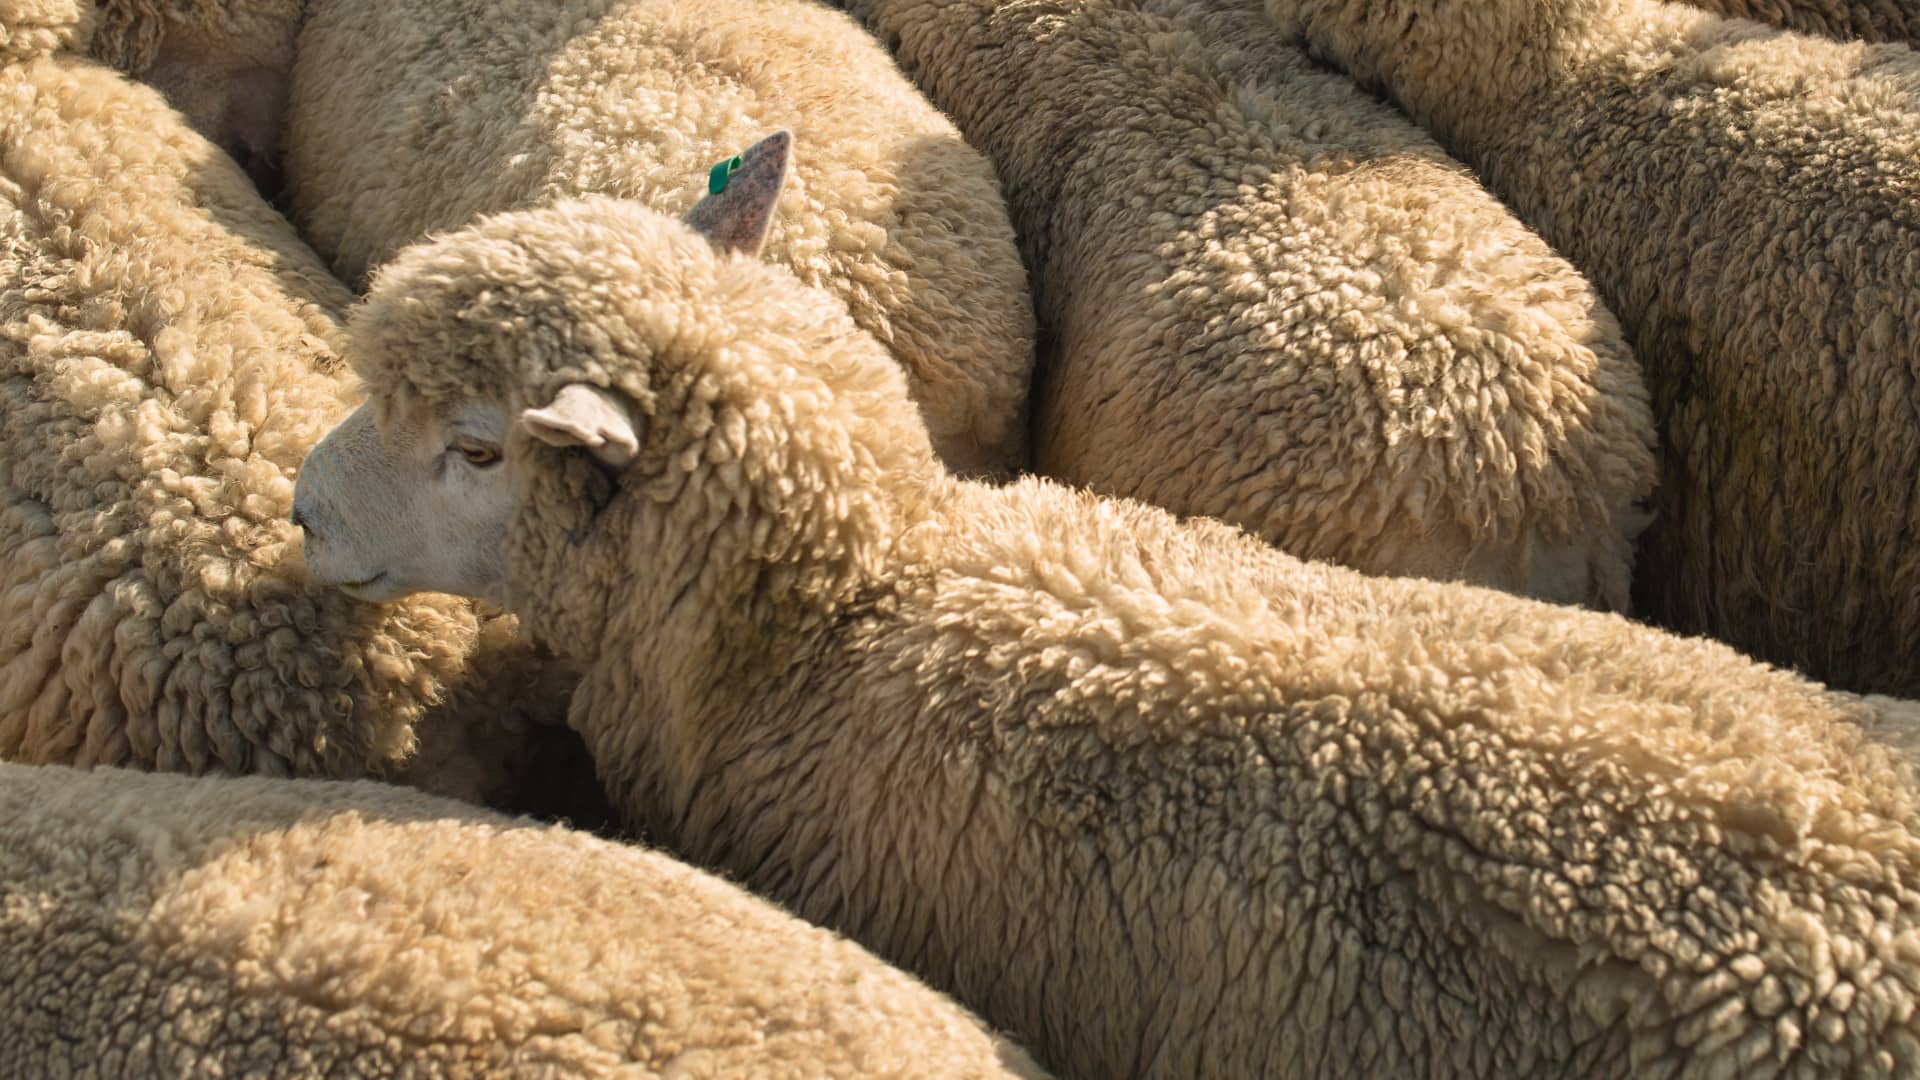 Wool – Why is Wool, Nature’s “Miracle Fibre”, in Trouble